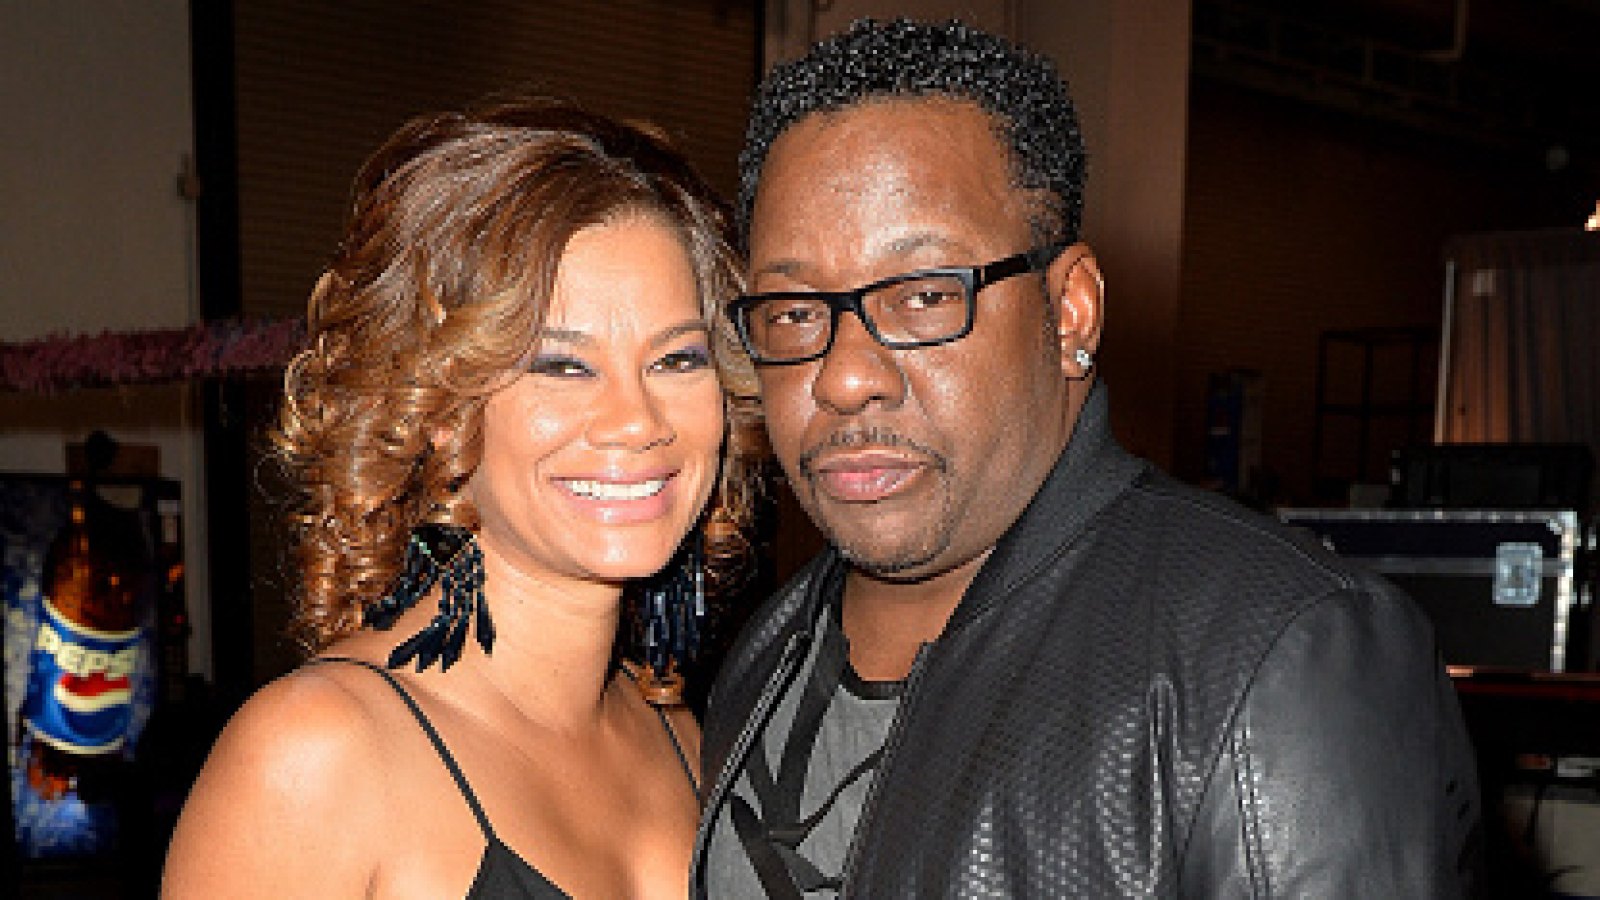 Alicia Etheredge and Bobby Brown